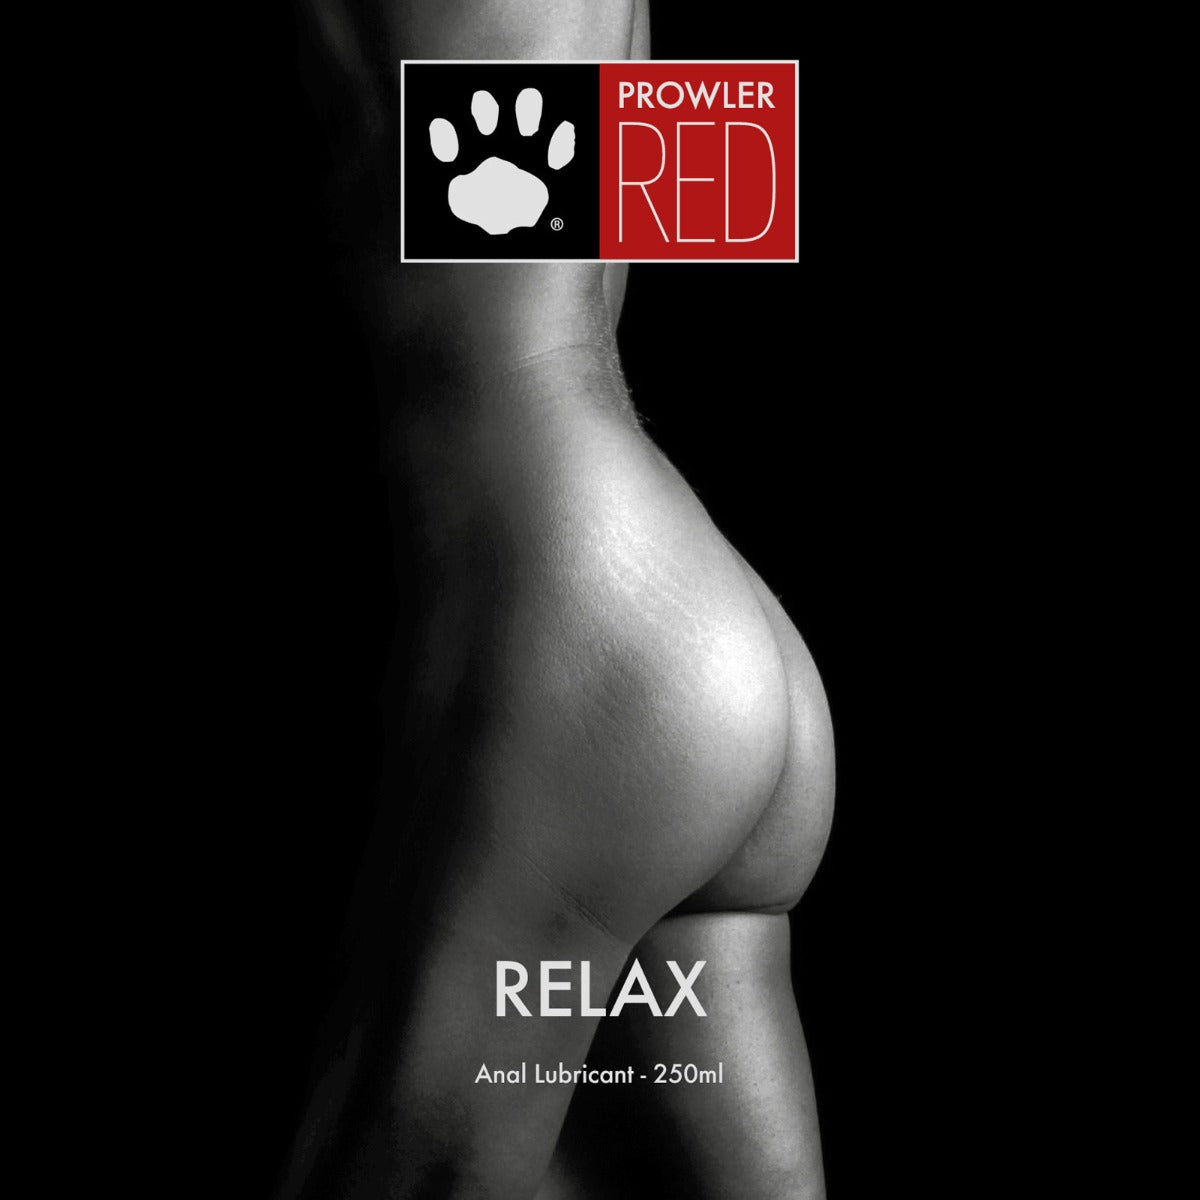 Water Based Lube Prowler RED Relax Anal Lube 250ml   